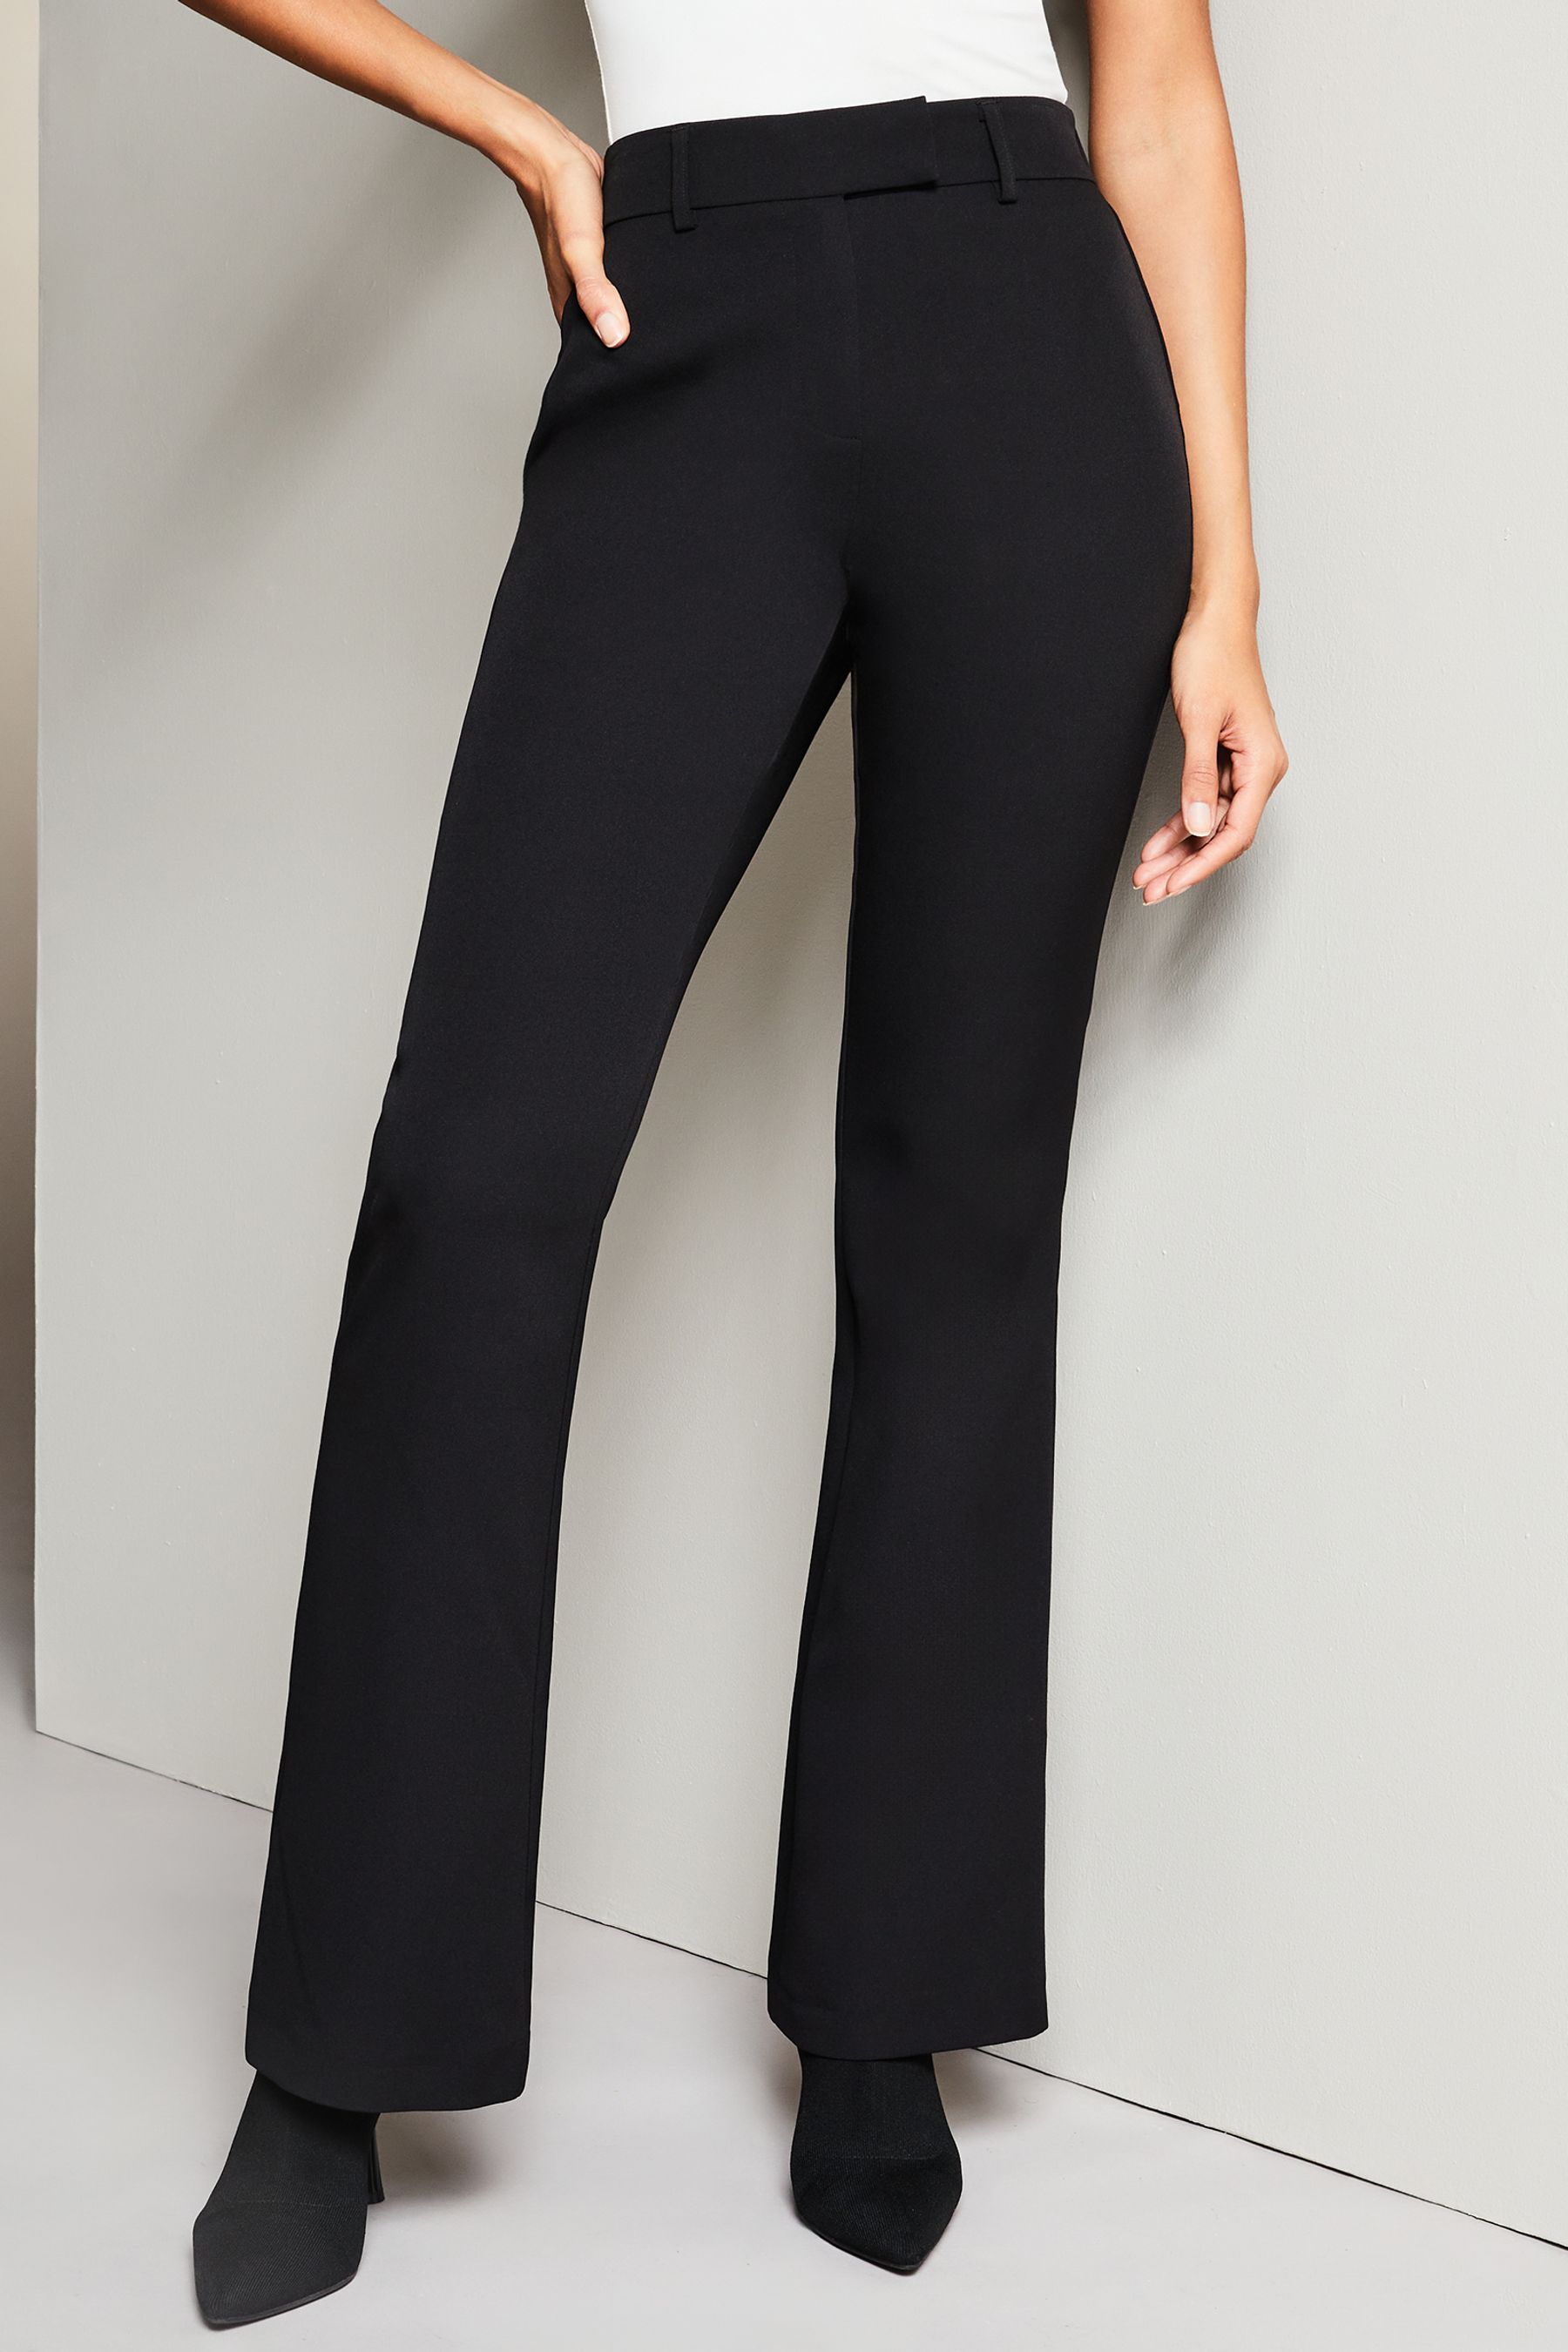 Buy Lipsy Black Smart Bootleg Kick Flare Trousers from the Next UK ...